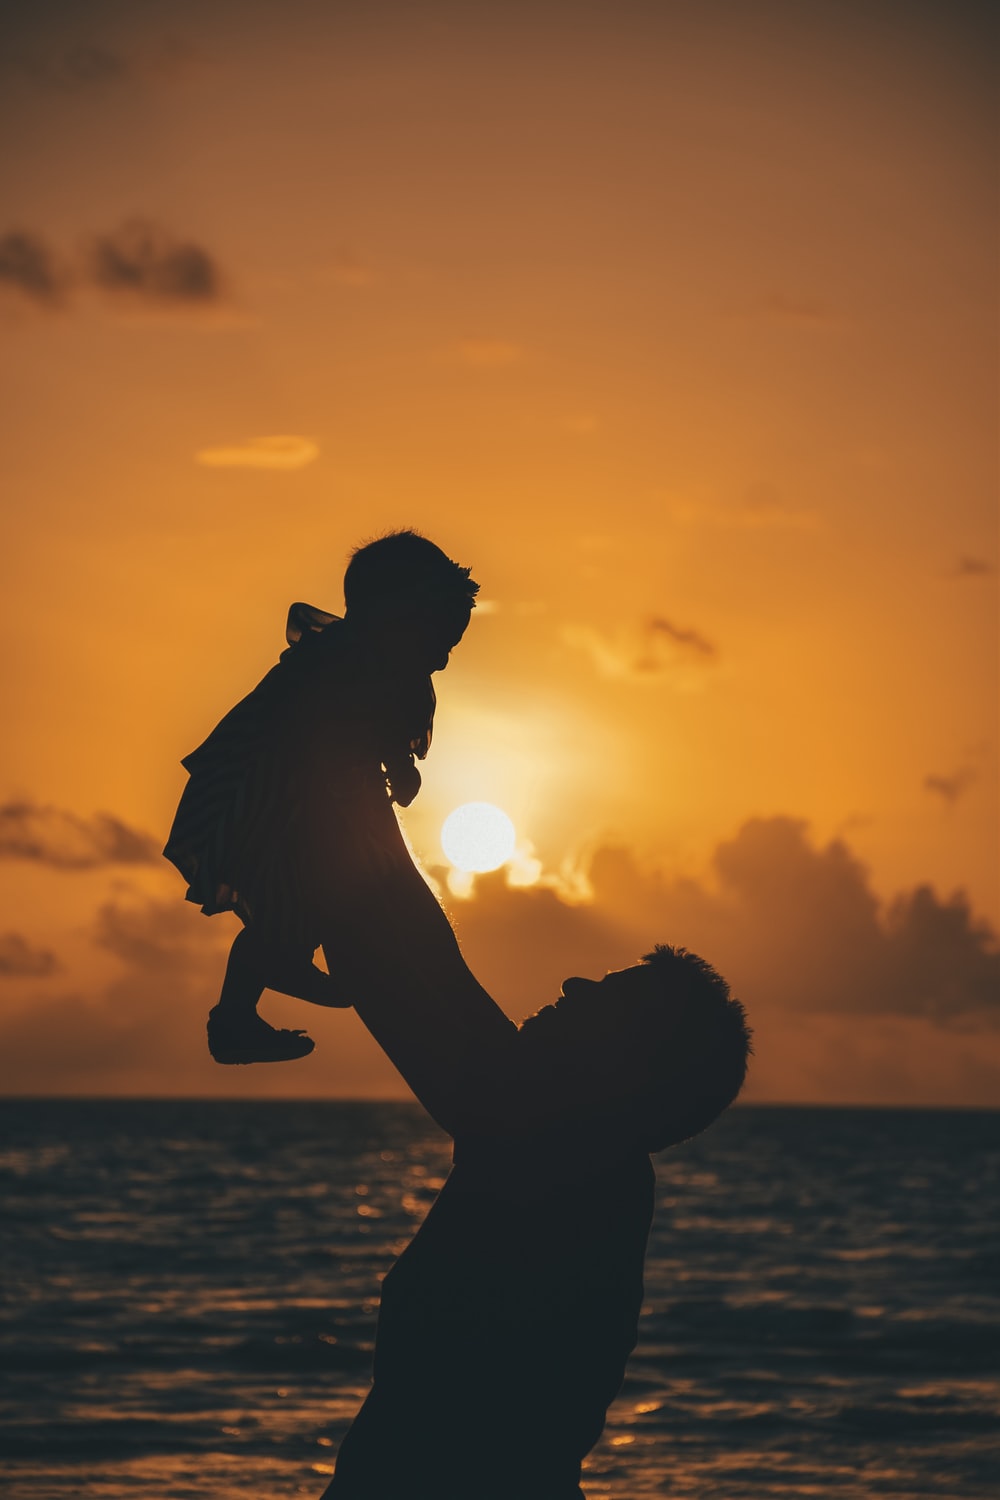 Fatherhood Picture. Download Free Image